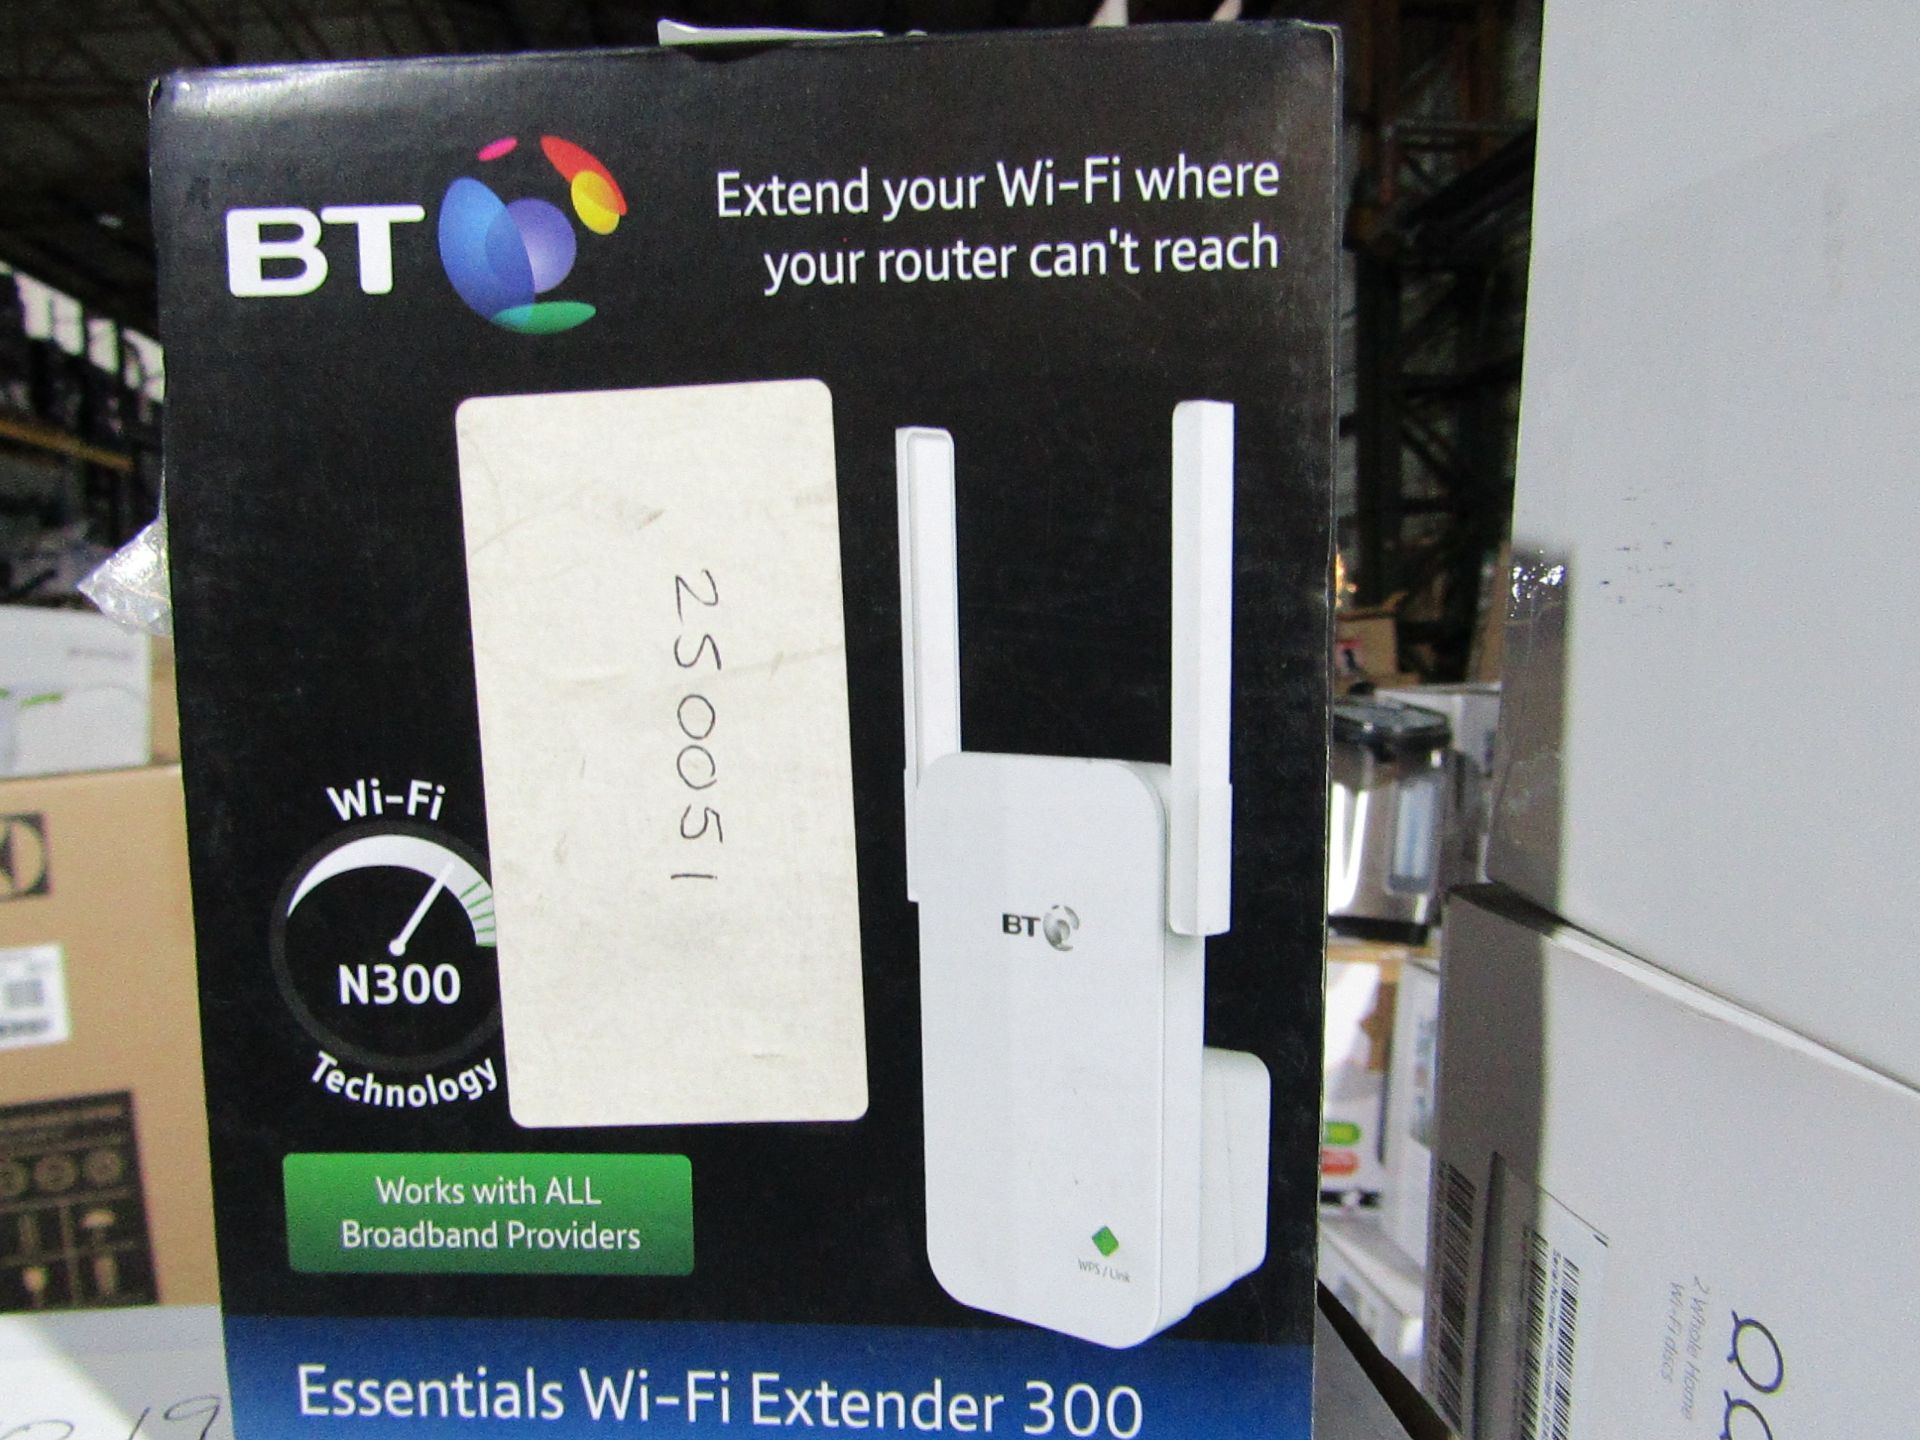 BT wifi extender 300, comes in original box and powers on but we havent checked it any further